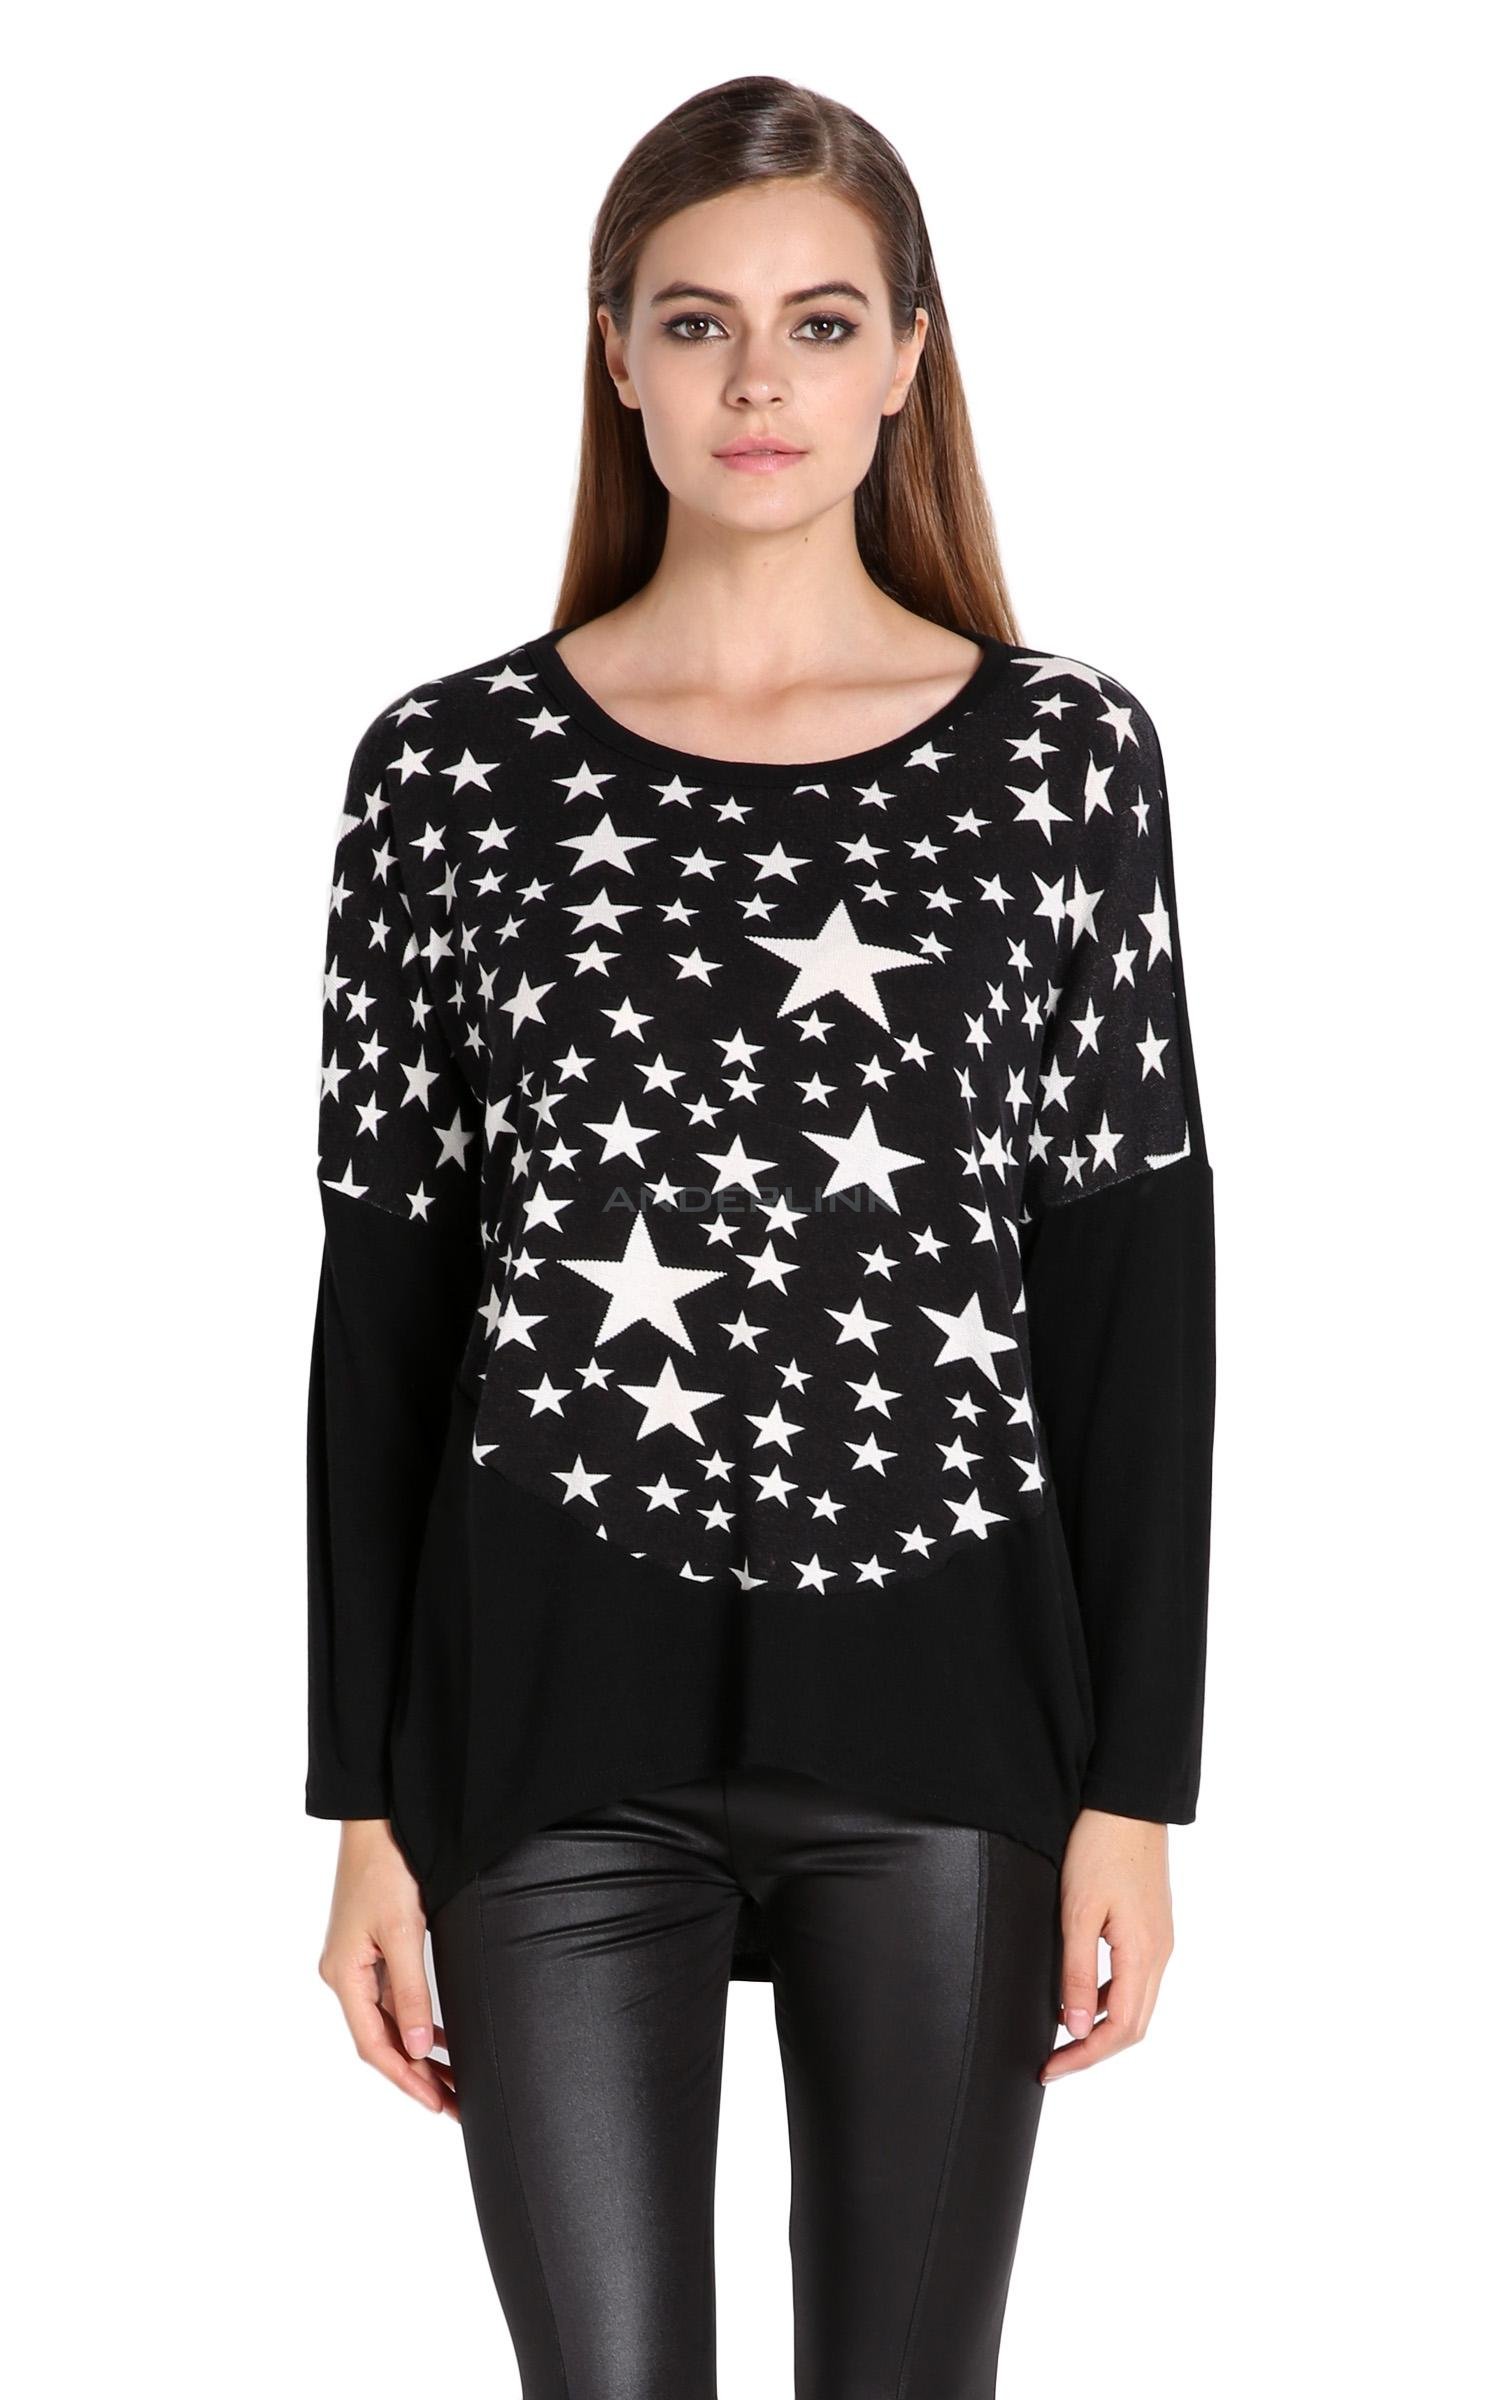 unknown New Stylish Lady Women's Loose Star Print Long Sleeve Casual Tops Blouse